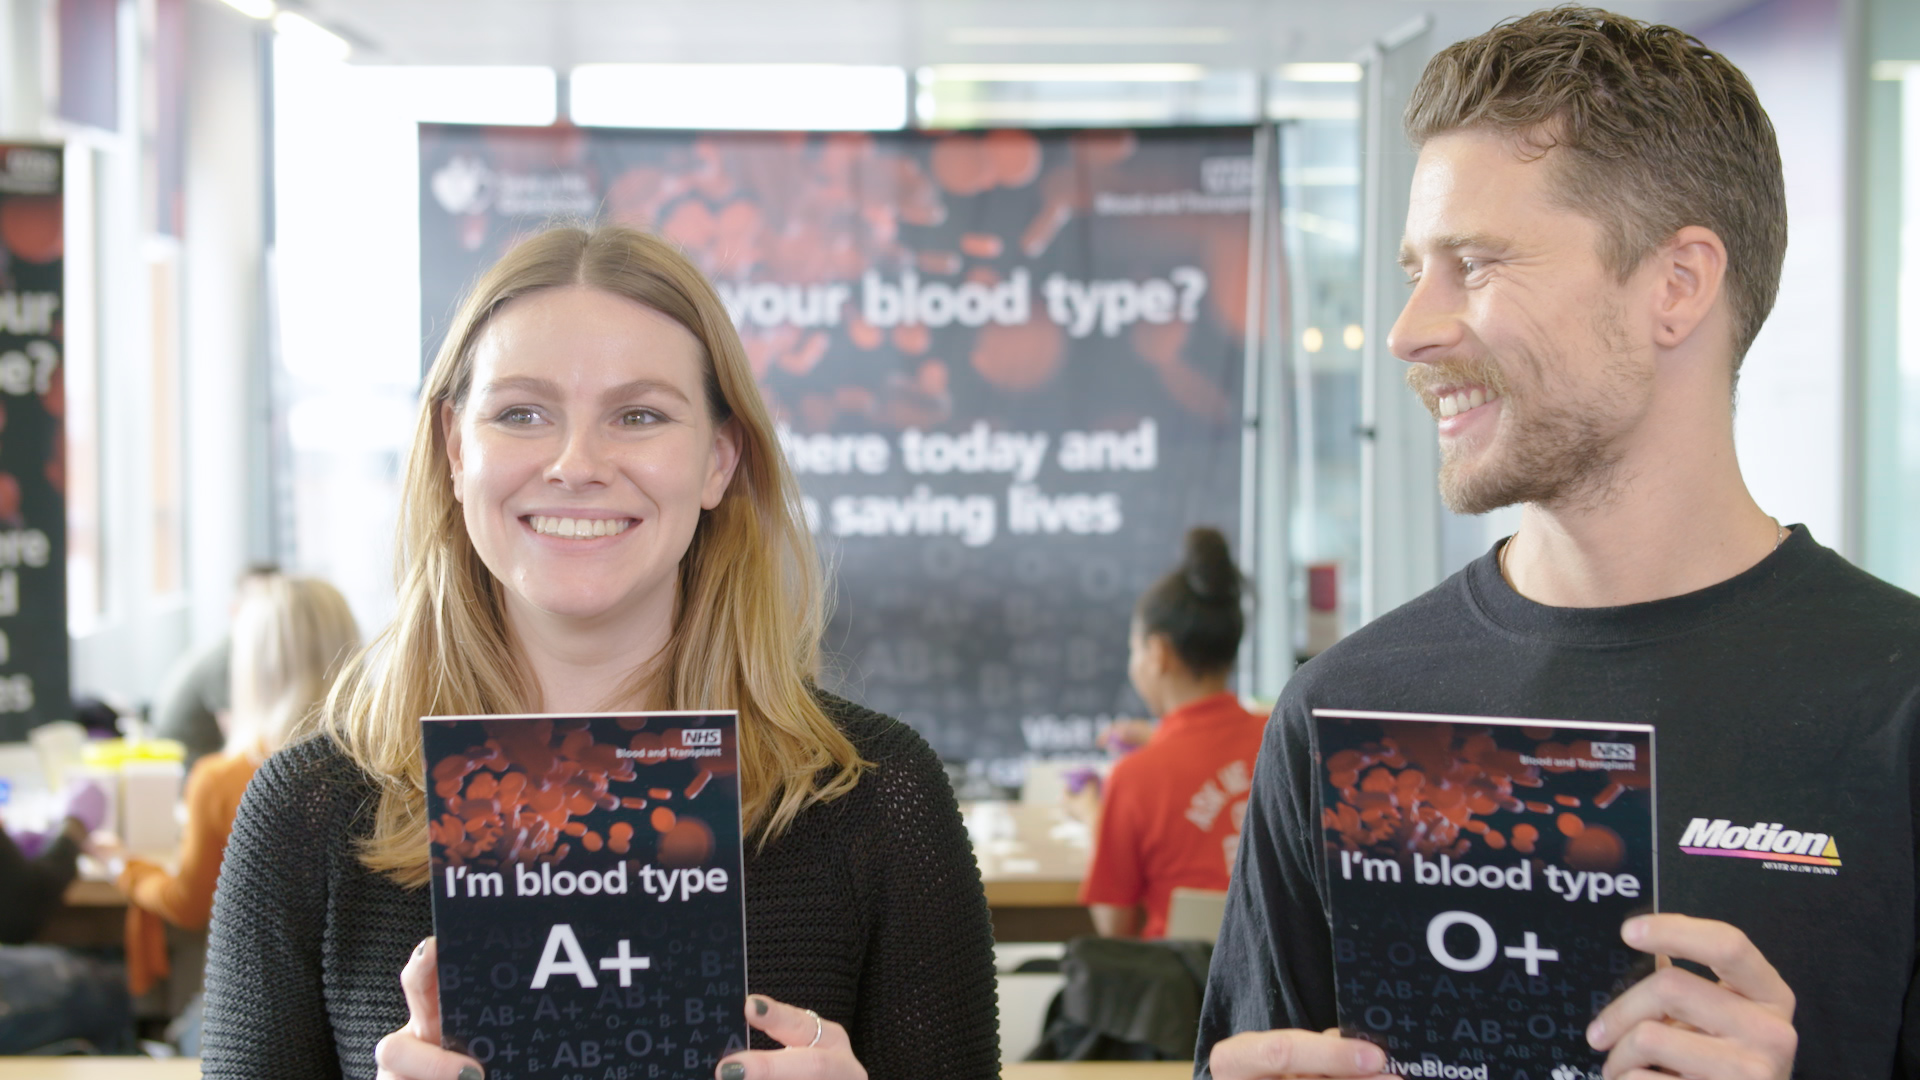 Two young people hold cards with their blood type on